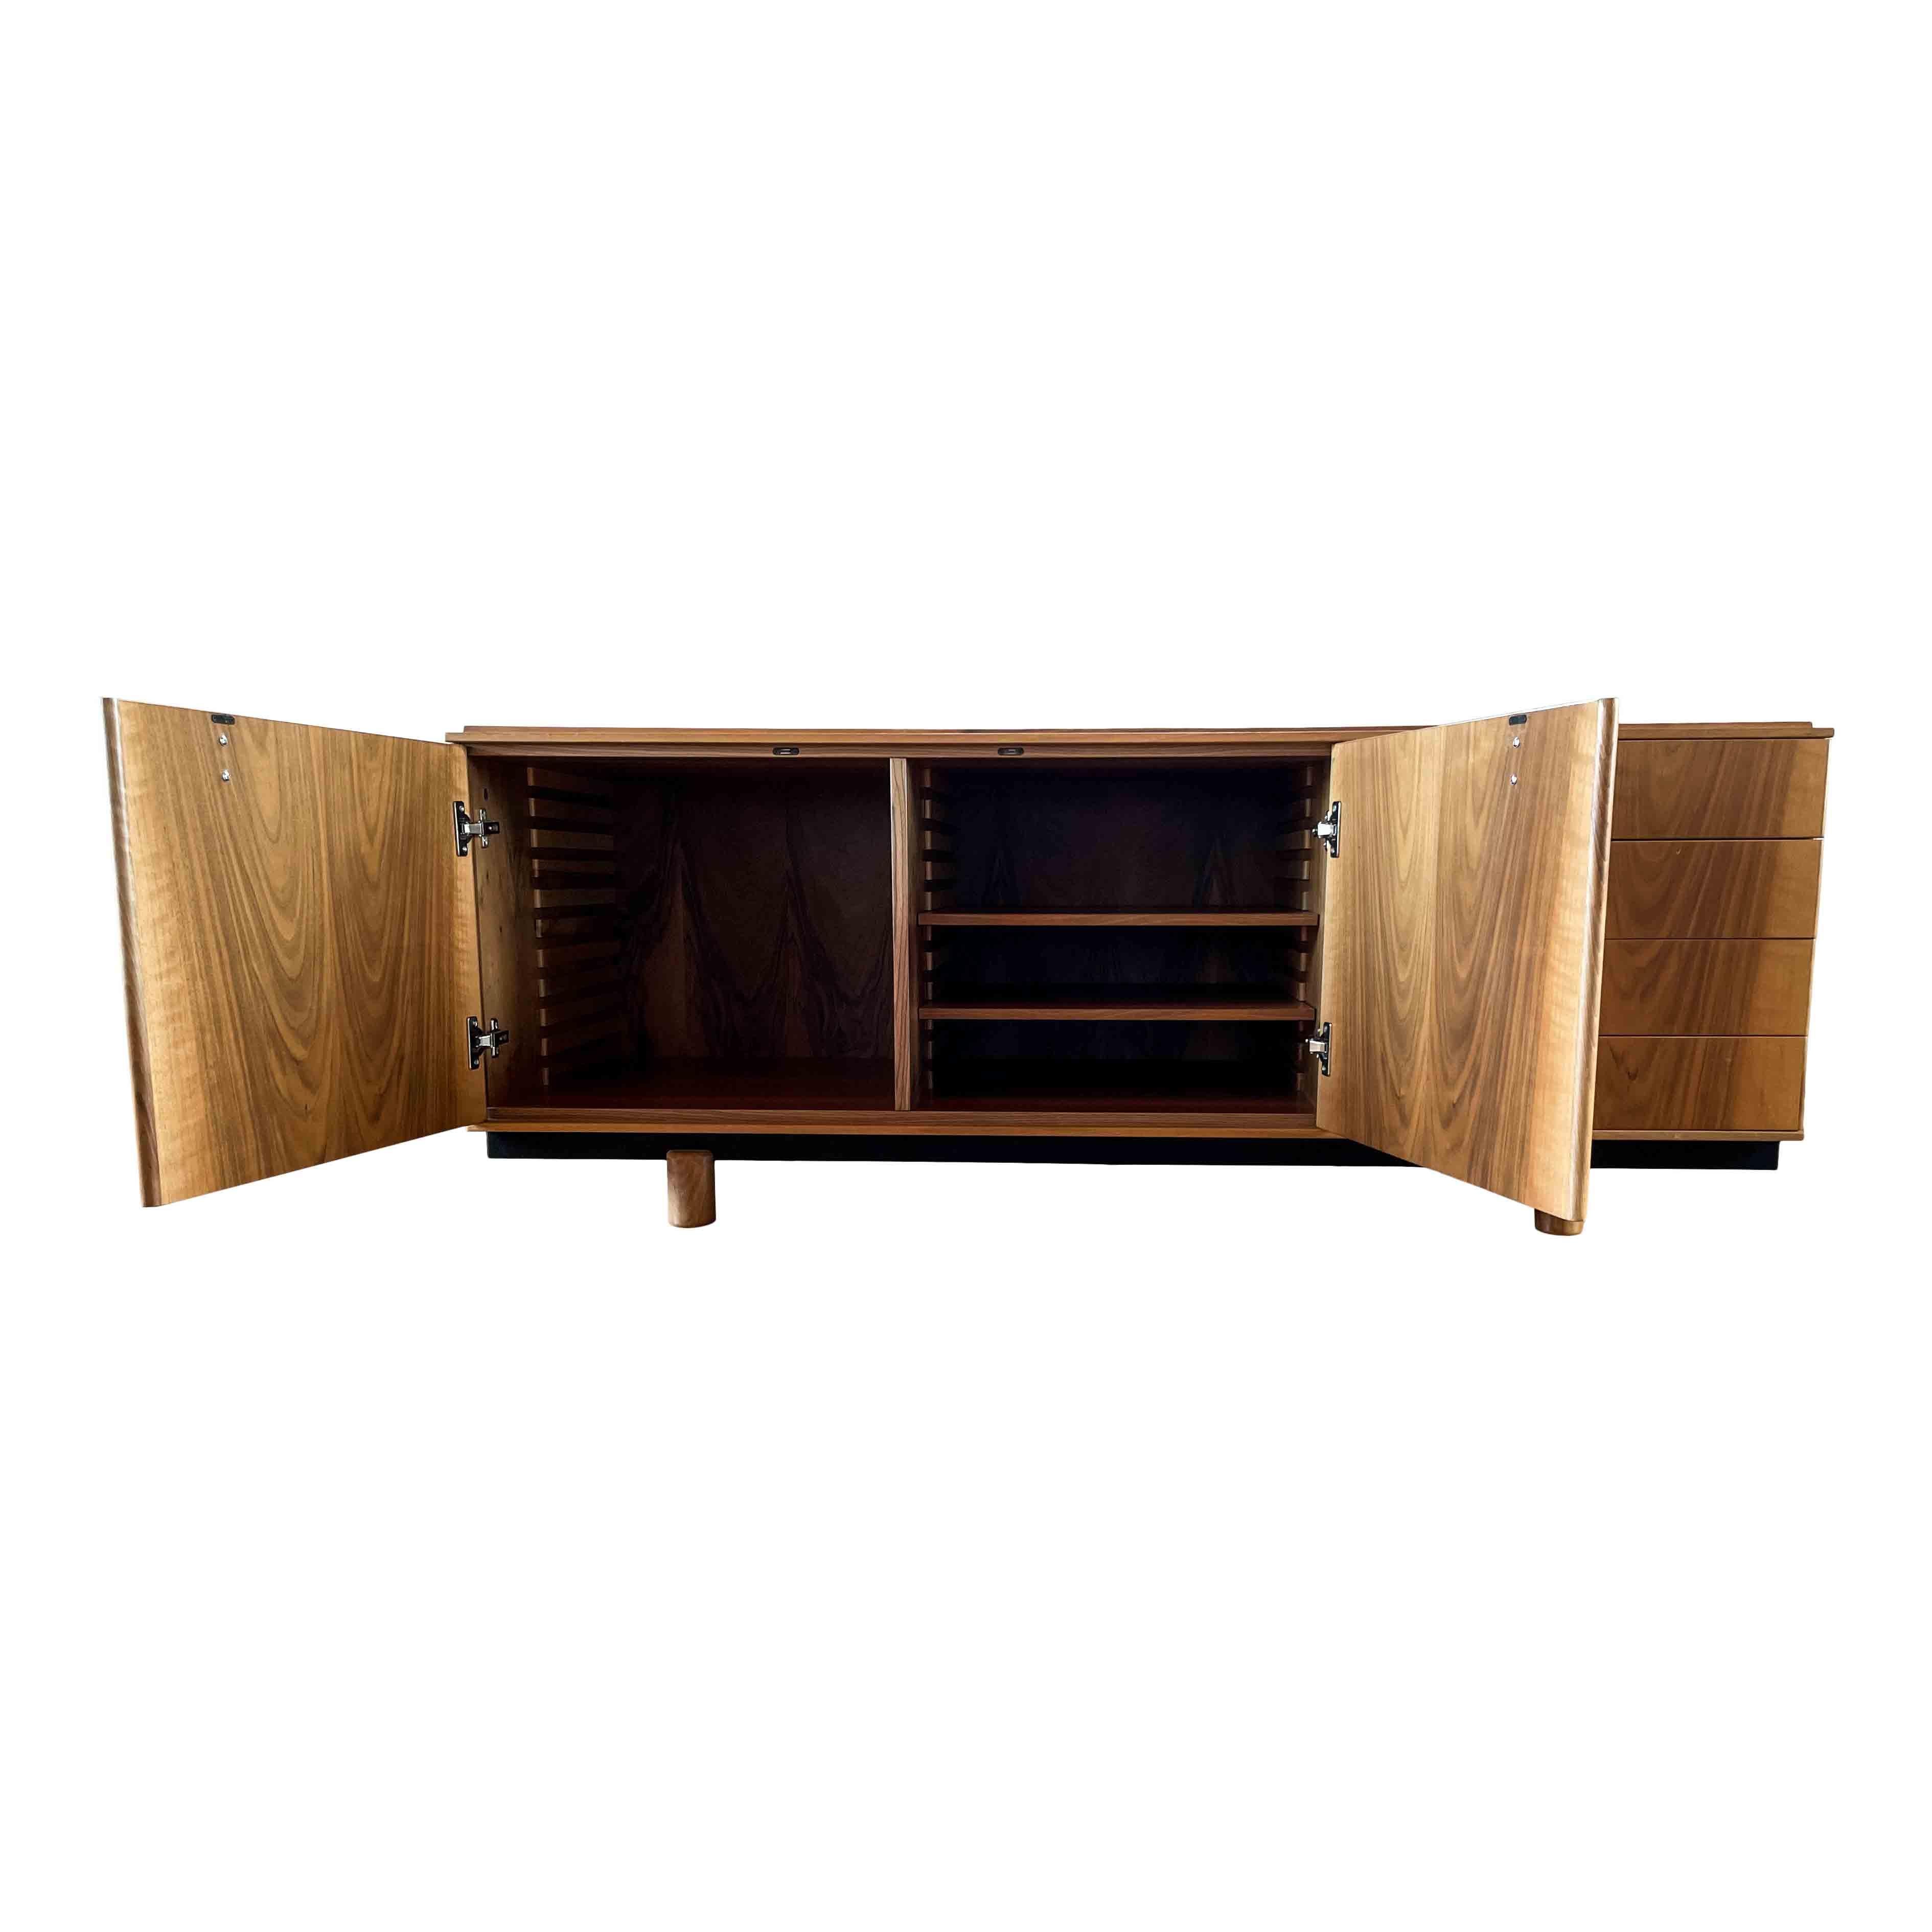 Gianfranco Frattini Walnut 809/C “Ovunque” Sideboard for Bernini, 1981 In Good Condition For Sale In Vicenza, IT